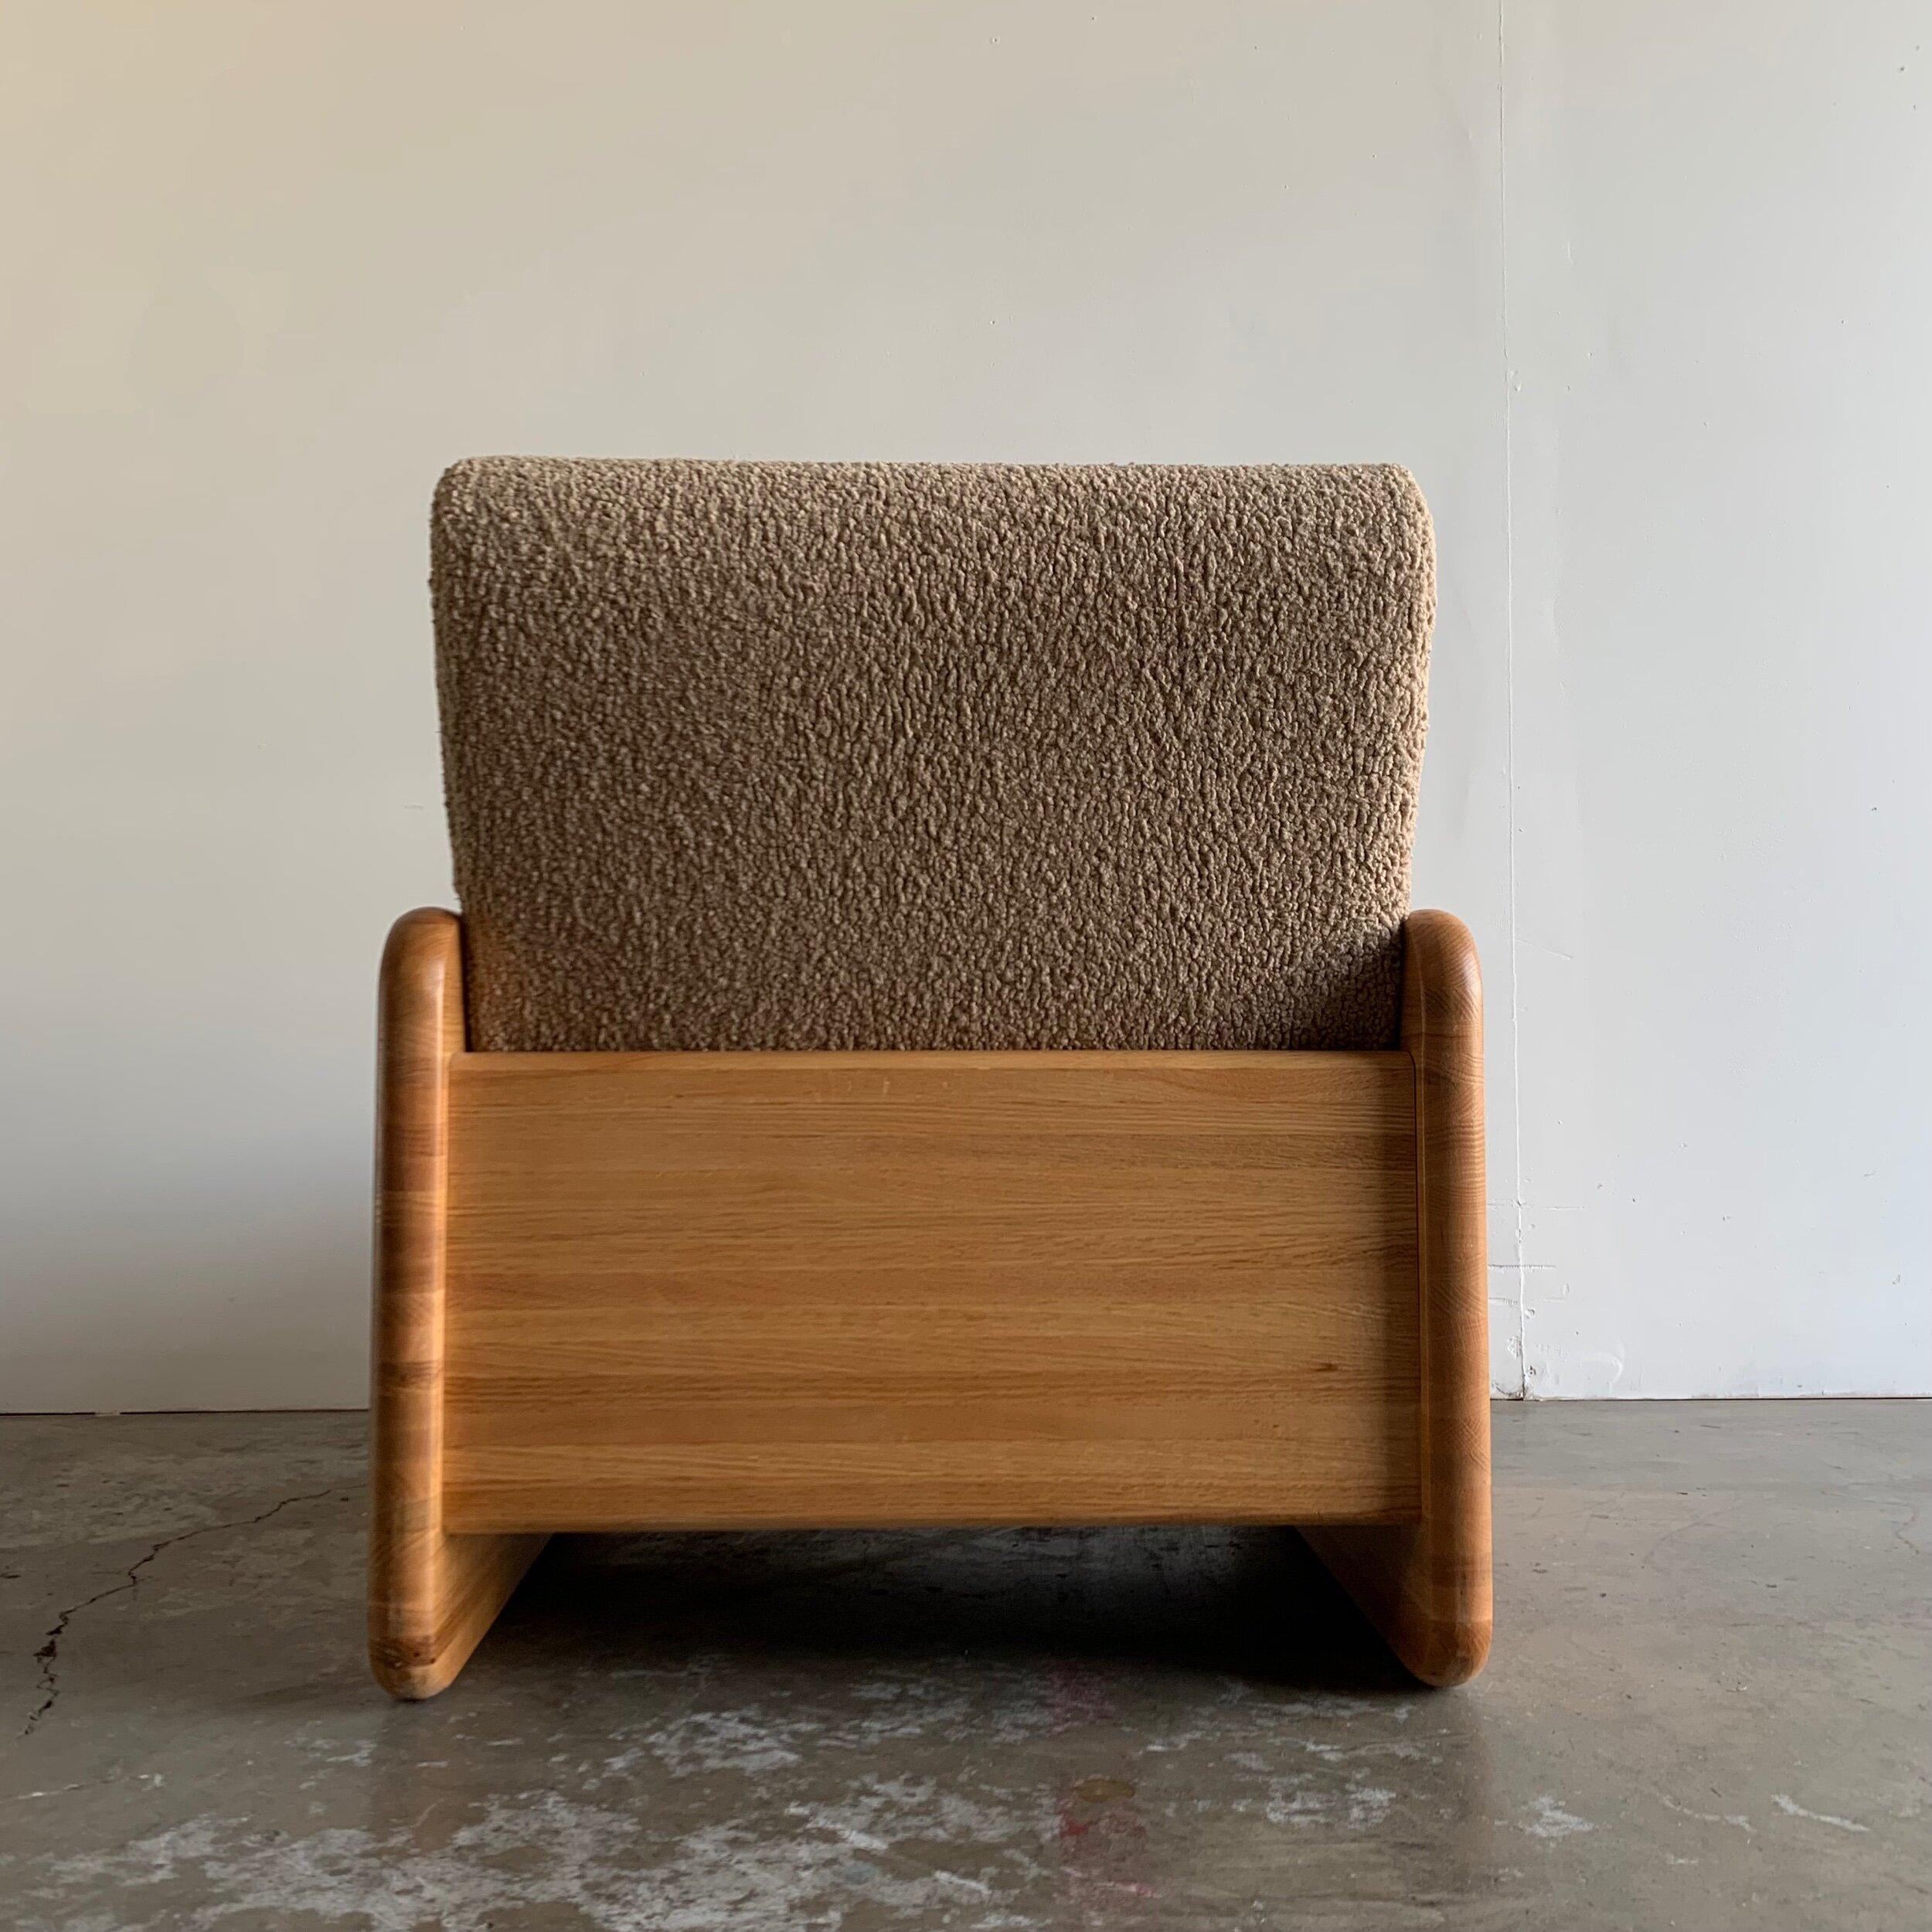 W28 D33 H32

SW24 SD19 SH17.25 AH4

Fully restored heavy duty solid oak lounge chair with No veneer , freshly redone in toast brown Sherpa. Item shows in excellent fully restored condition. *note areas where clips attach to frame are slightly